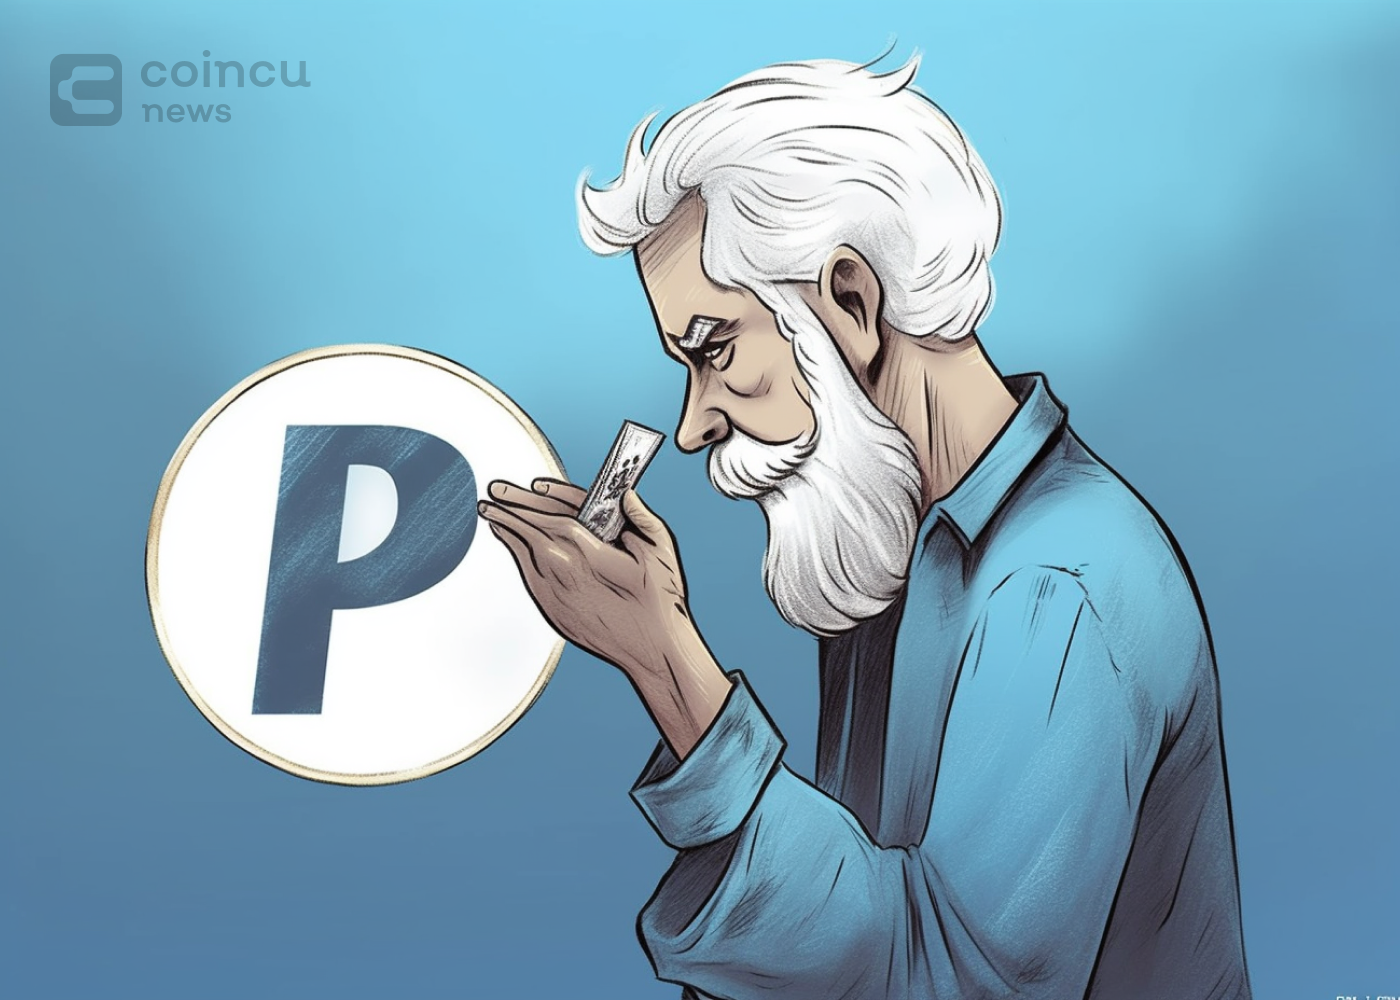 US Representative McHenry Praises PayPal's Groundbreaking Stablecoin Launch